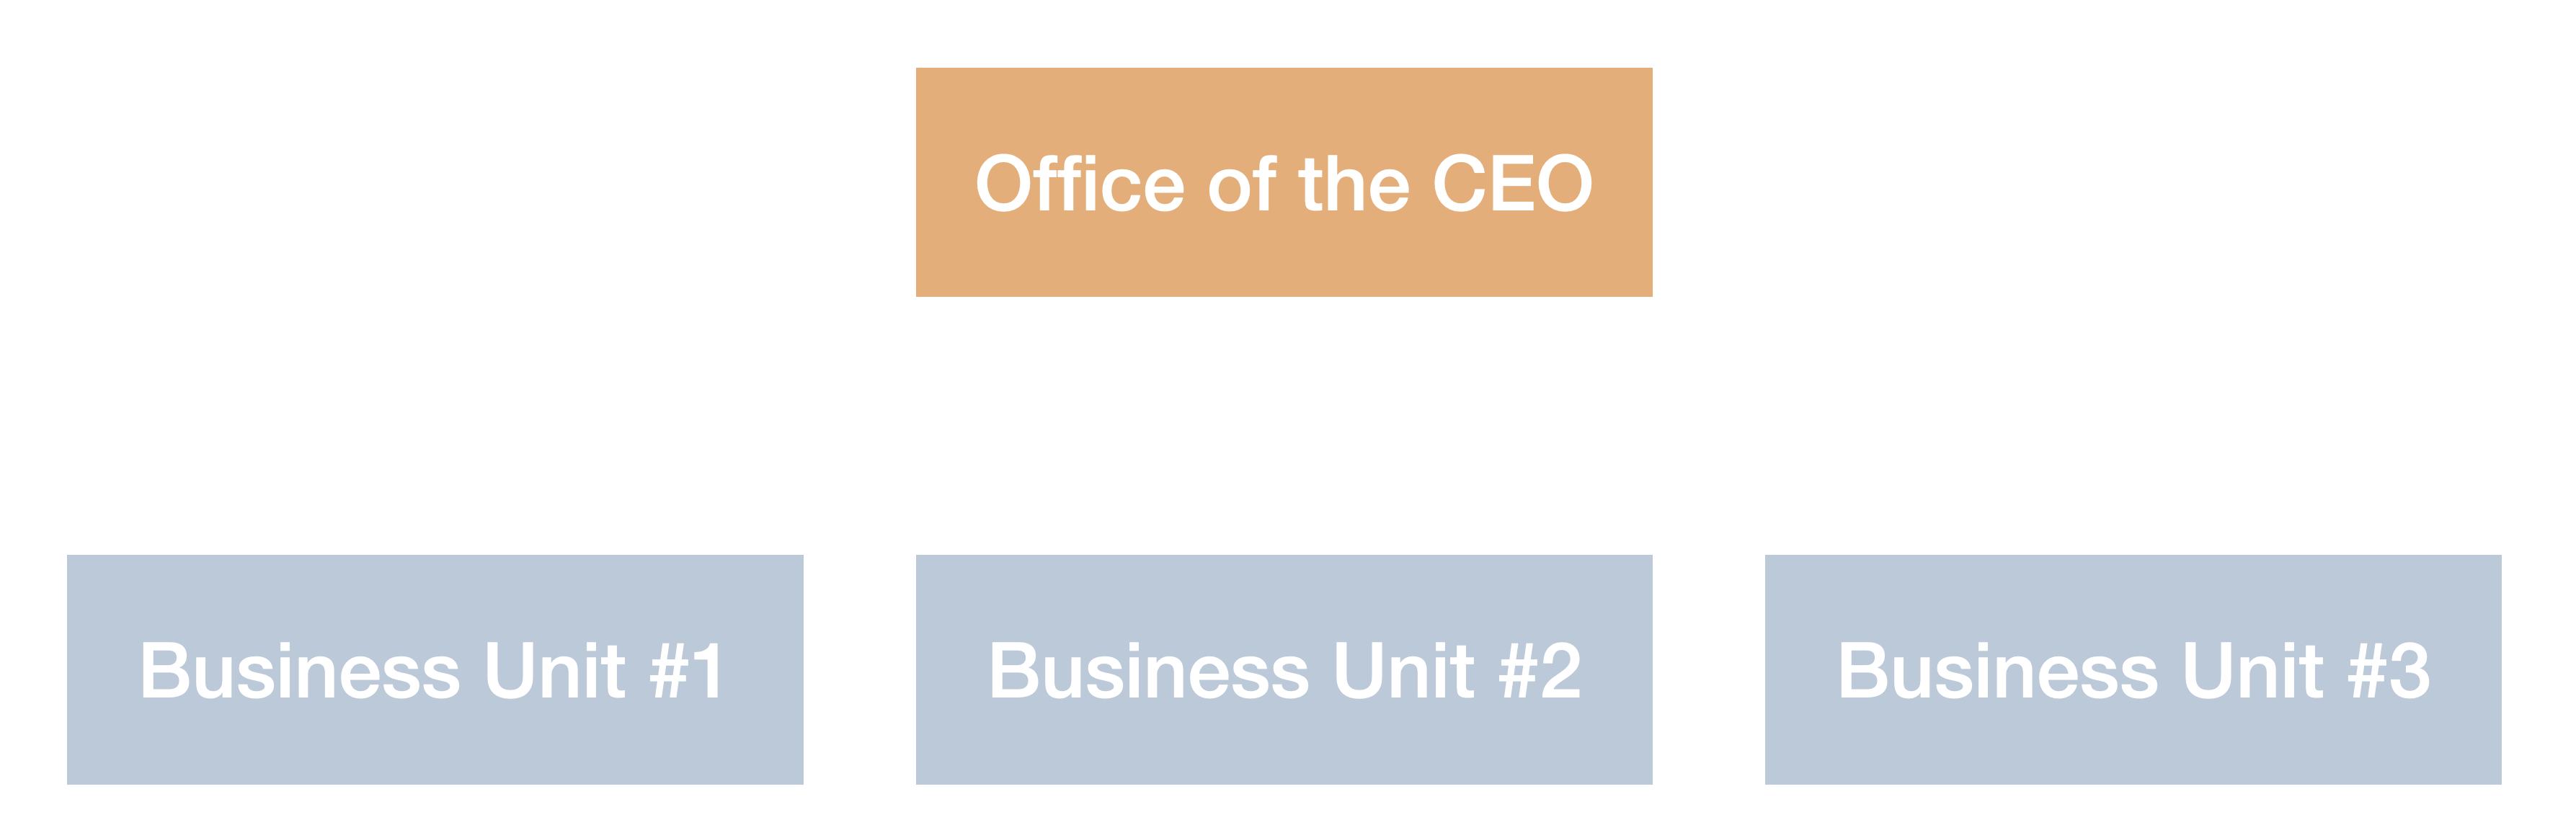 &ldquo;organizational chart of a large software company with an office of the CEO & multiple business units&rdquo;